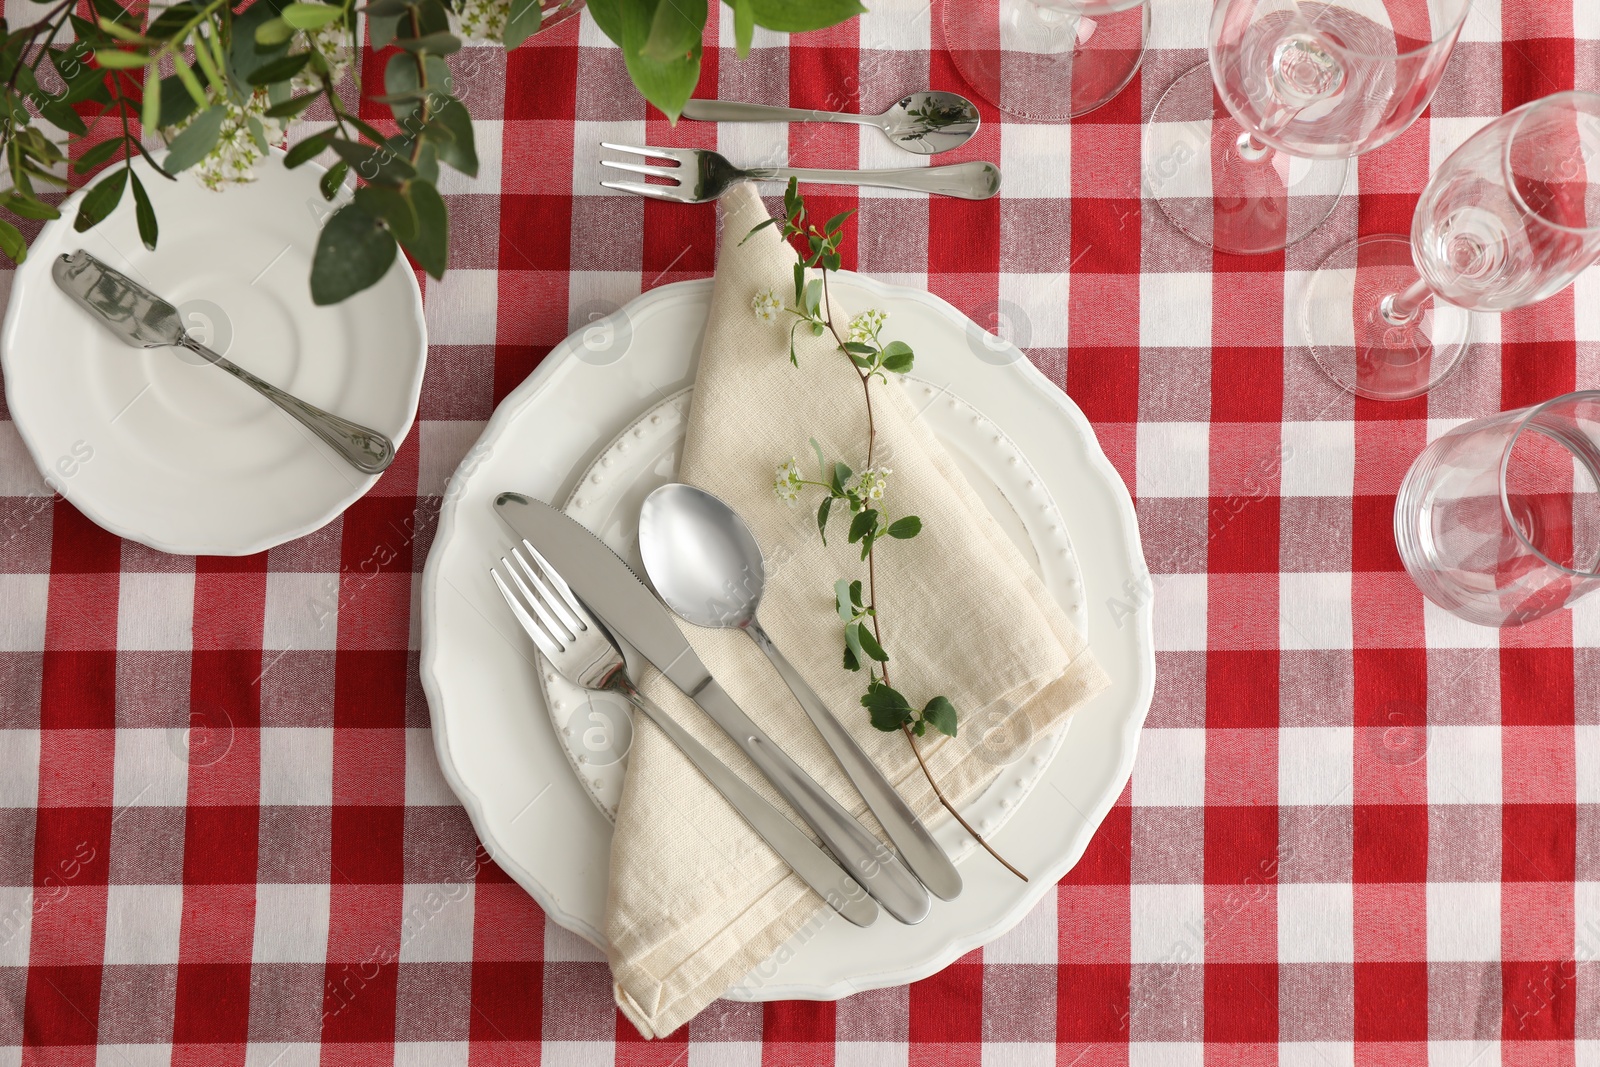 Photo of Stylish setting with cutlery, plates, napkin, glasses and floral decor on table, flat lay